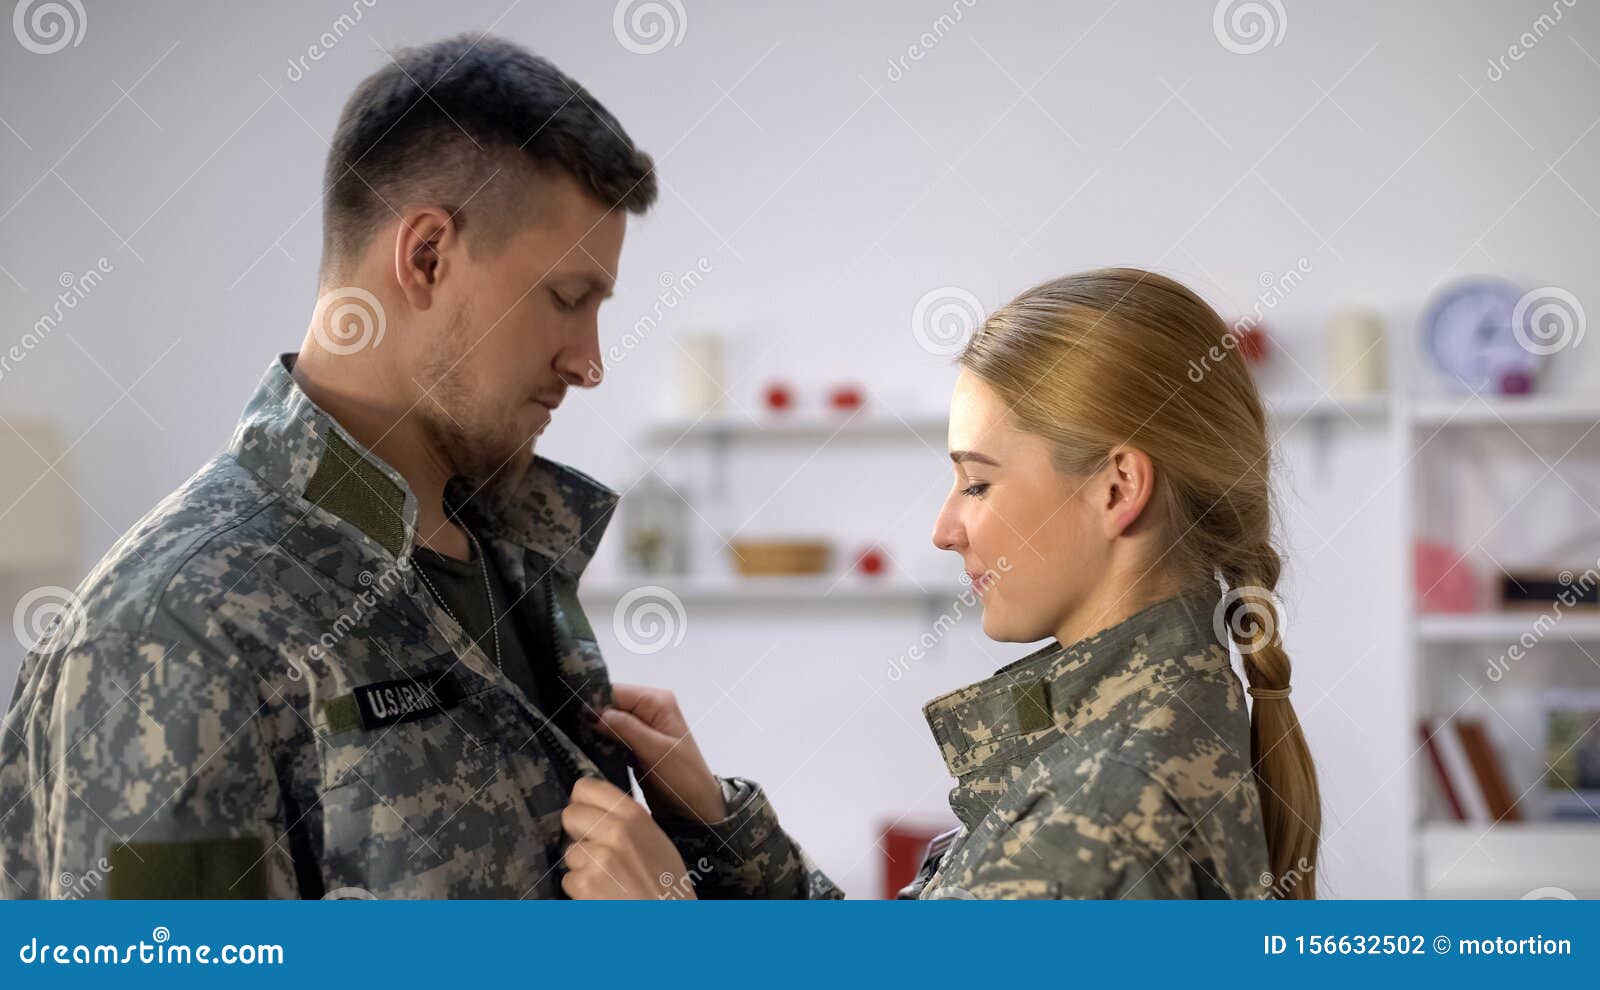 Female US Soldier Helping To Wear Uniform Military Boyfriend Tender  Relationship Stock Photo - Image of cheerful, hero: 156632502